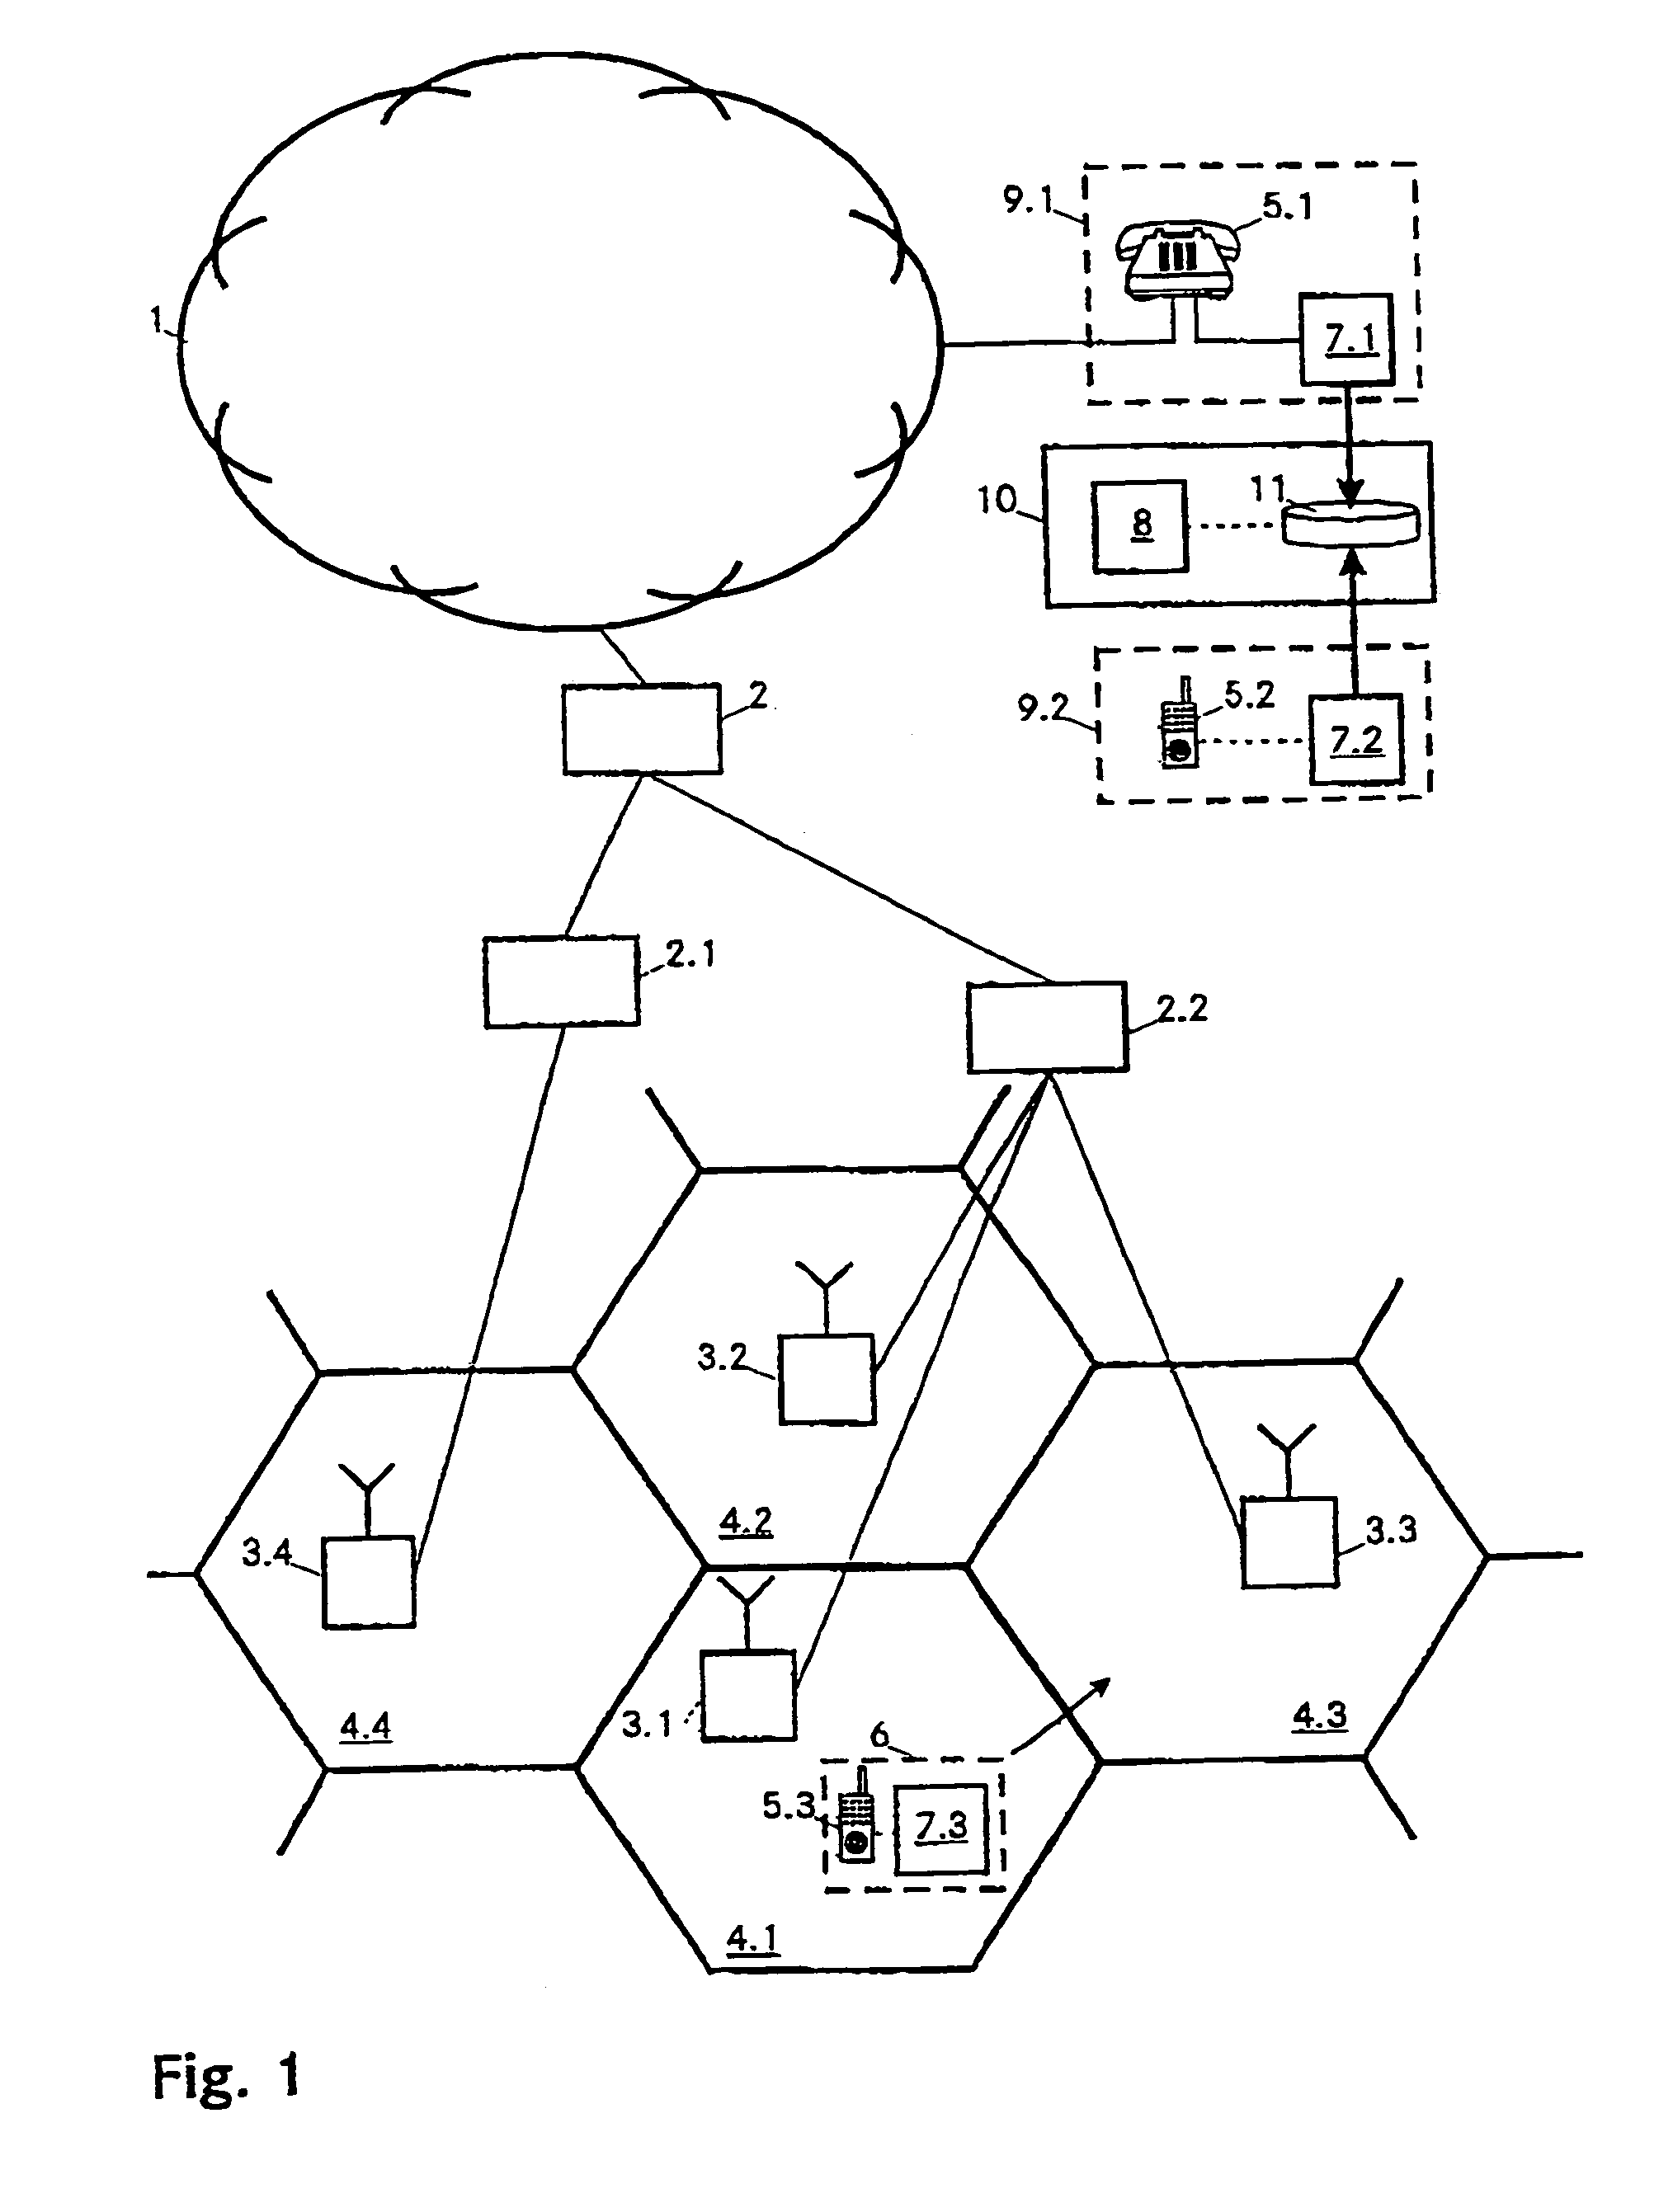 Method for the automated analysis of a mobile radio telephone system